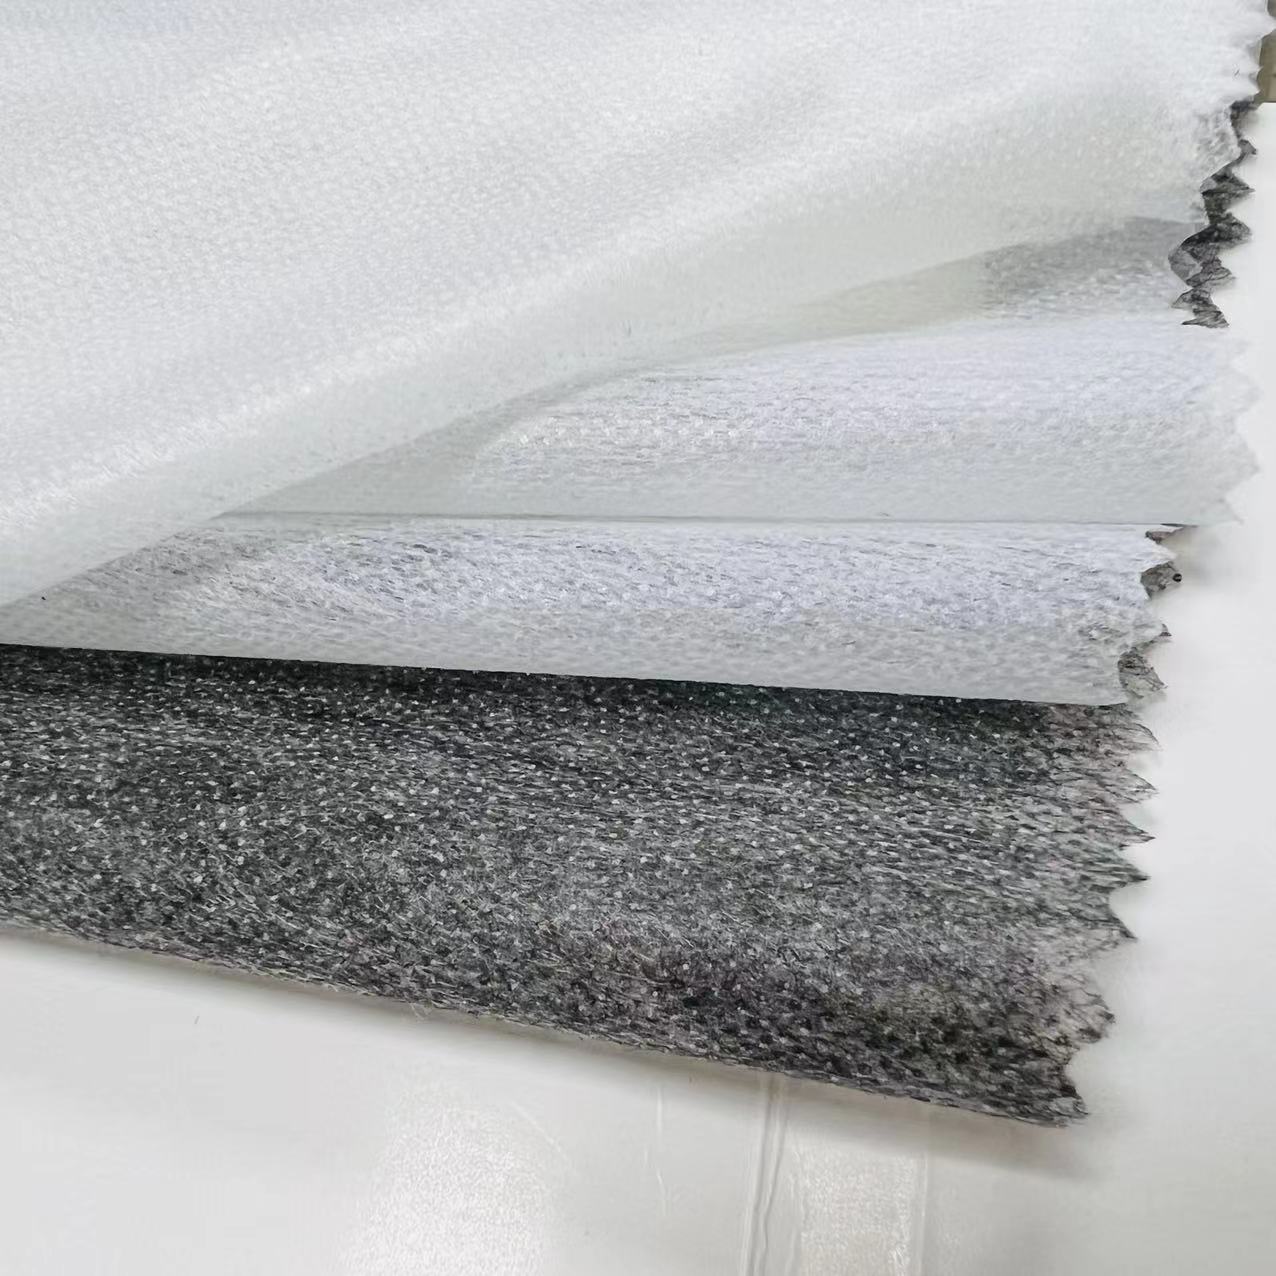 Professional Manufacturer stretch twill woven fusing interlining interfacing fusible interlining fabric for men's suit